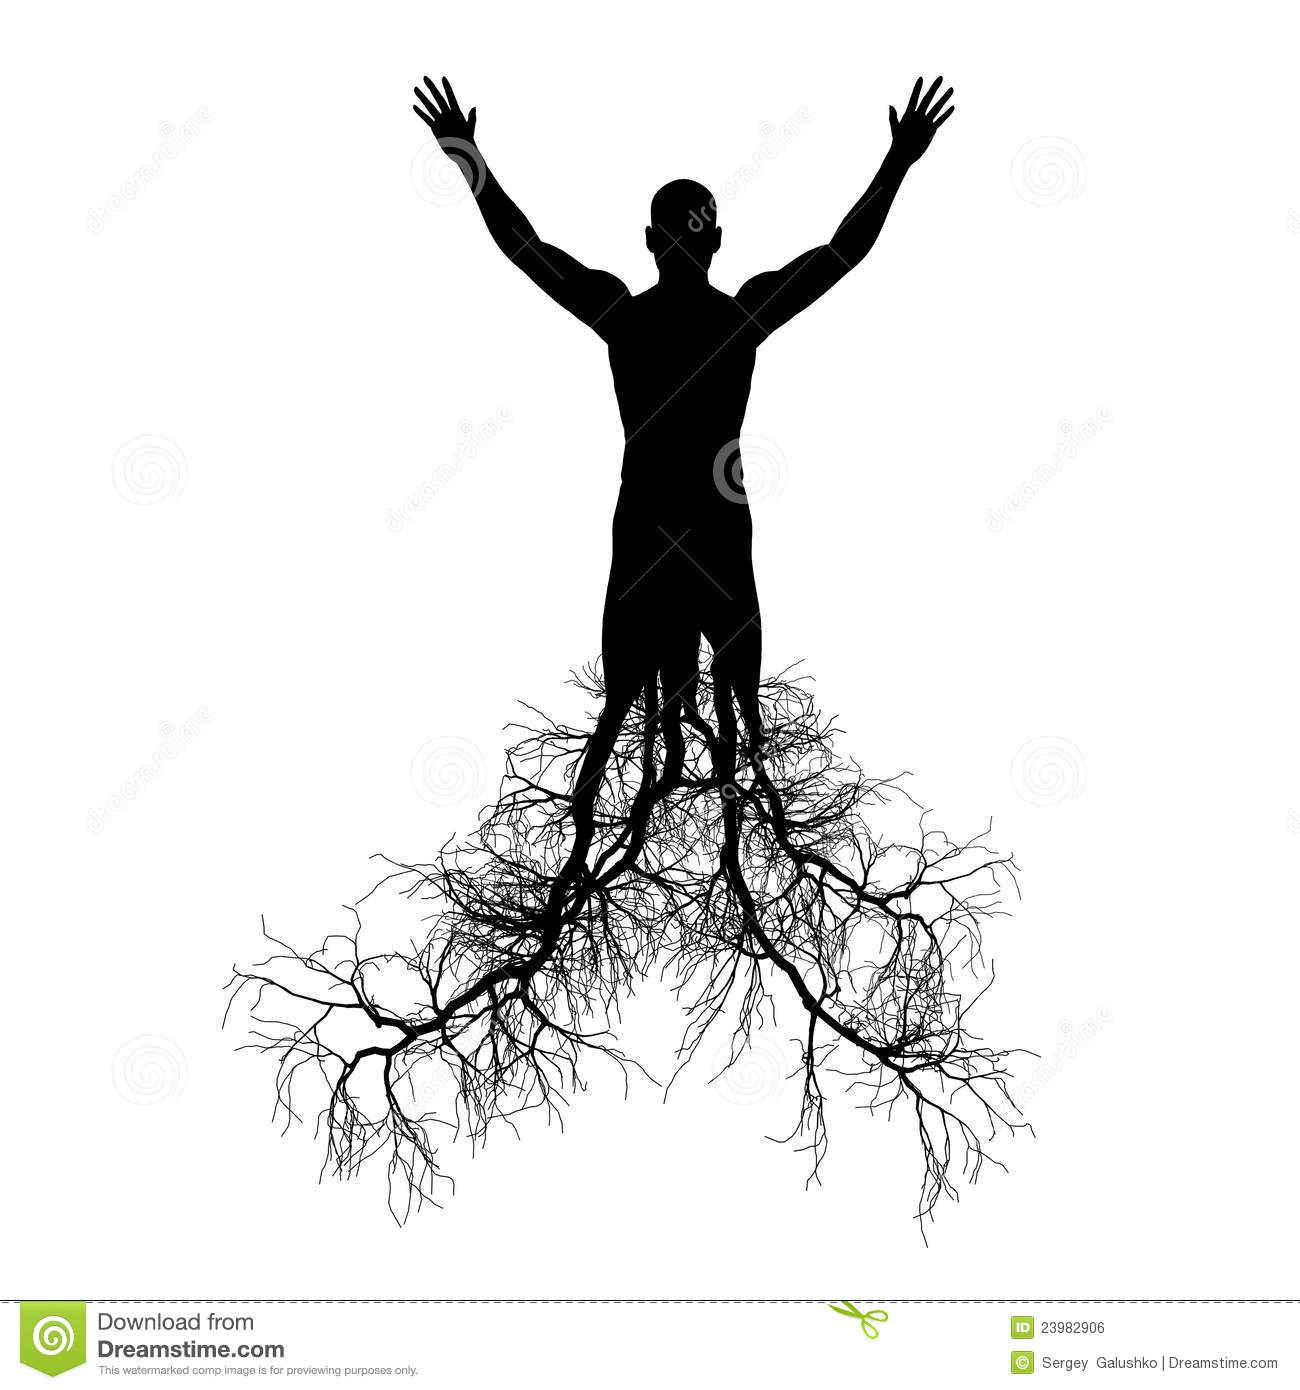 Images of Tree with Roots as a Man